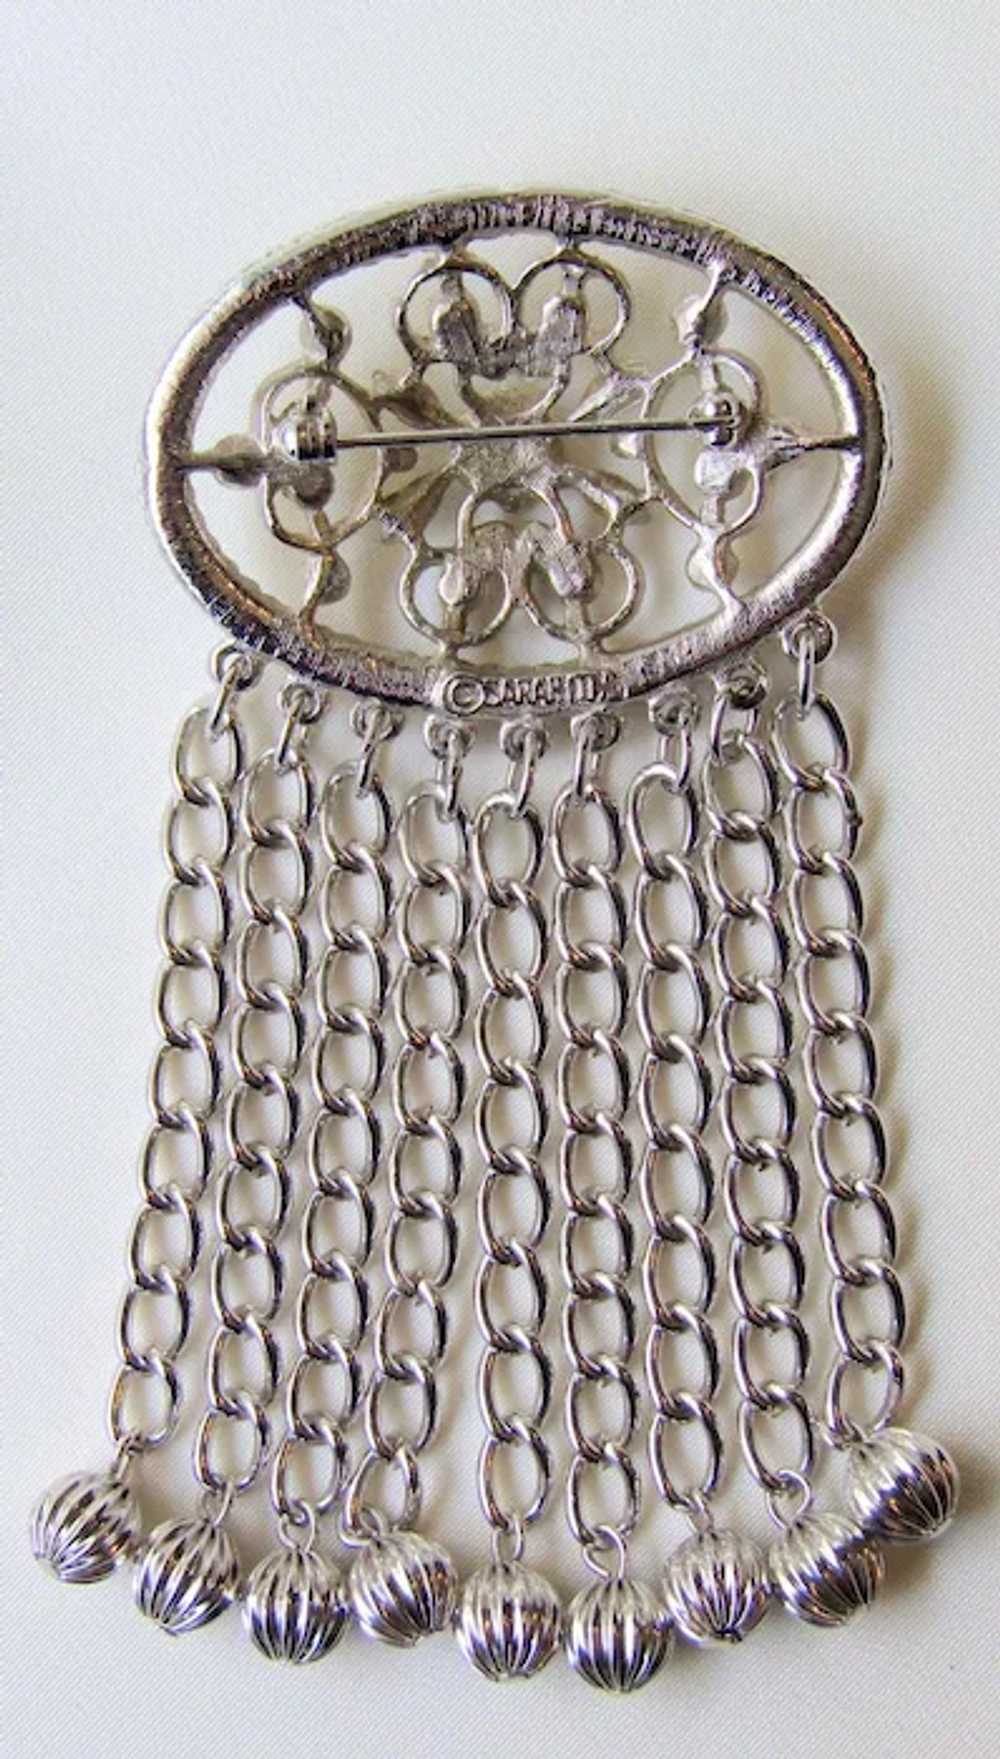 Vintage Sarah Coventry Chains Brooch Pin - image 3